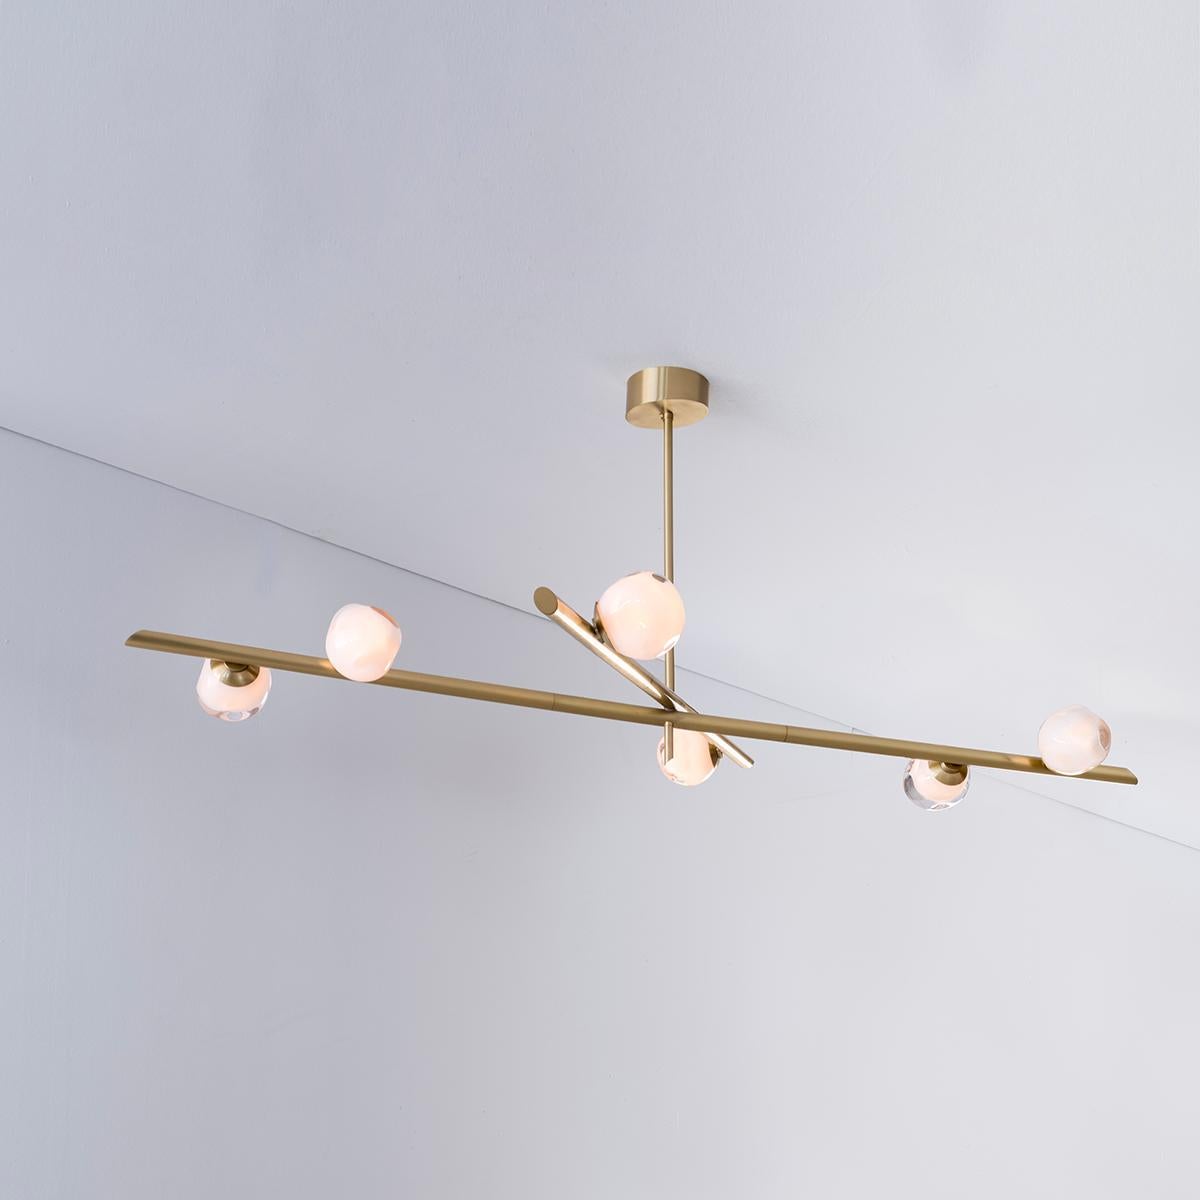 Italian Antares Ceiling Light by Gaspare Asaro-Polished Nickel Finish For Sale